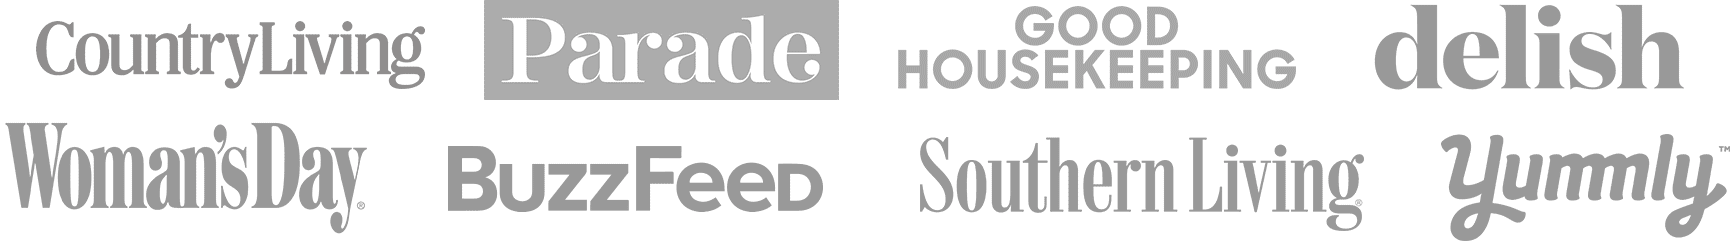 Press logos: Country Living, Parade, Good Housekeeping, Delish, Woman's Day, BuzzFeed, Southern Living, Yummly